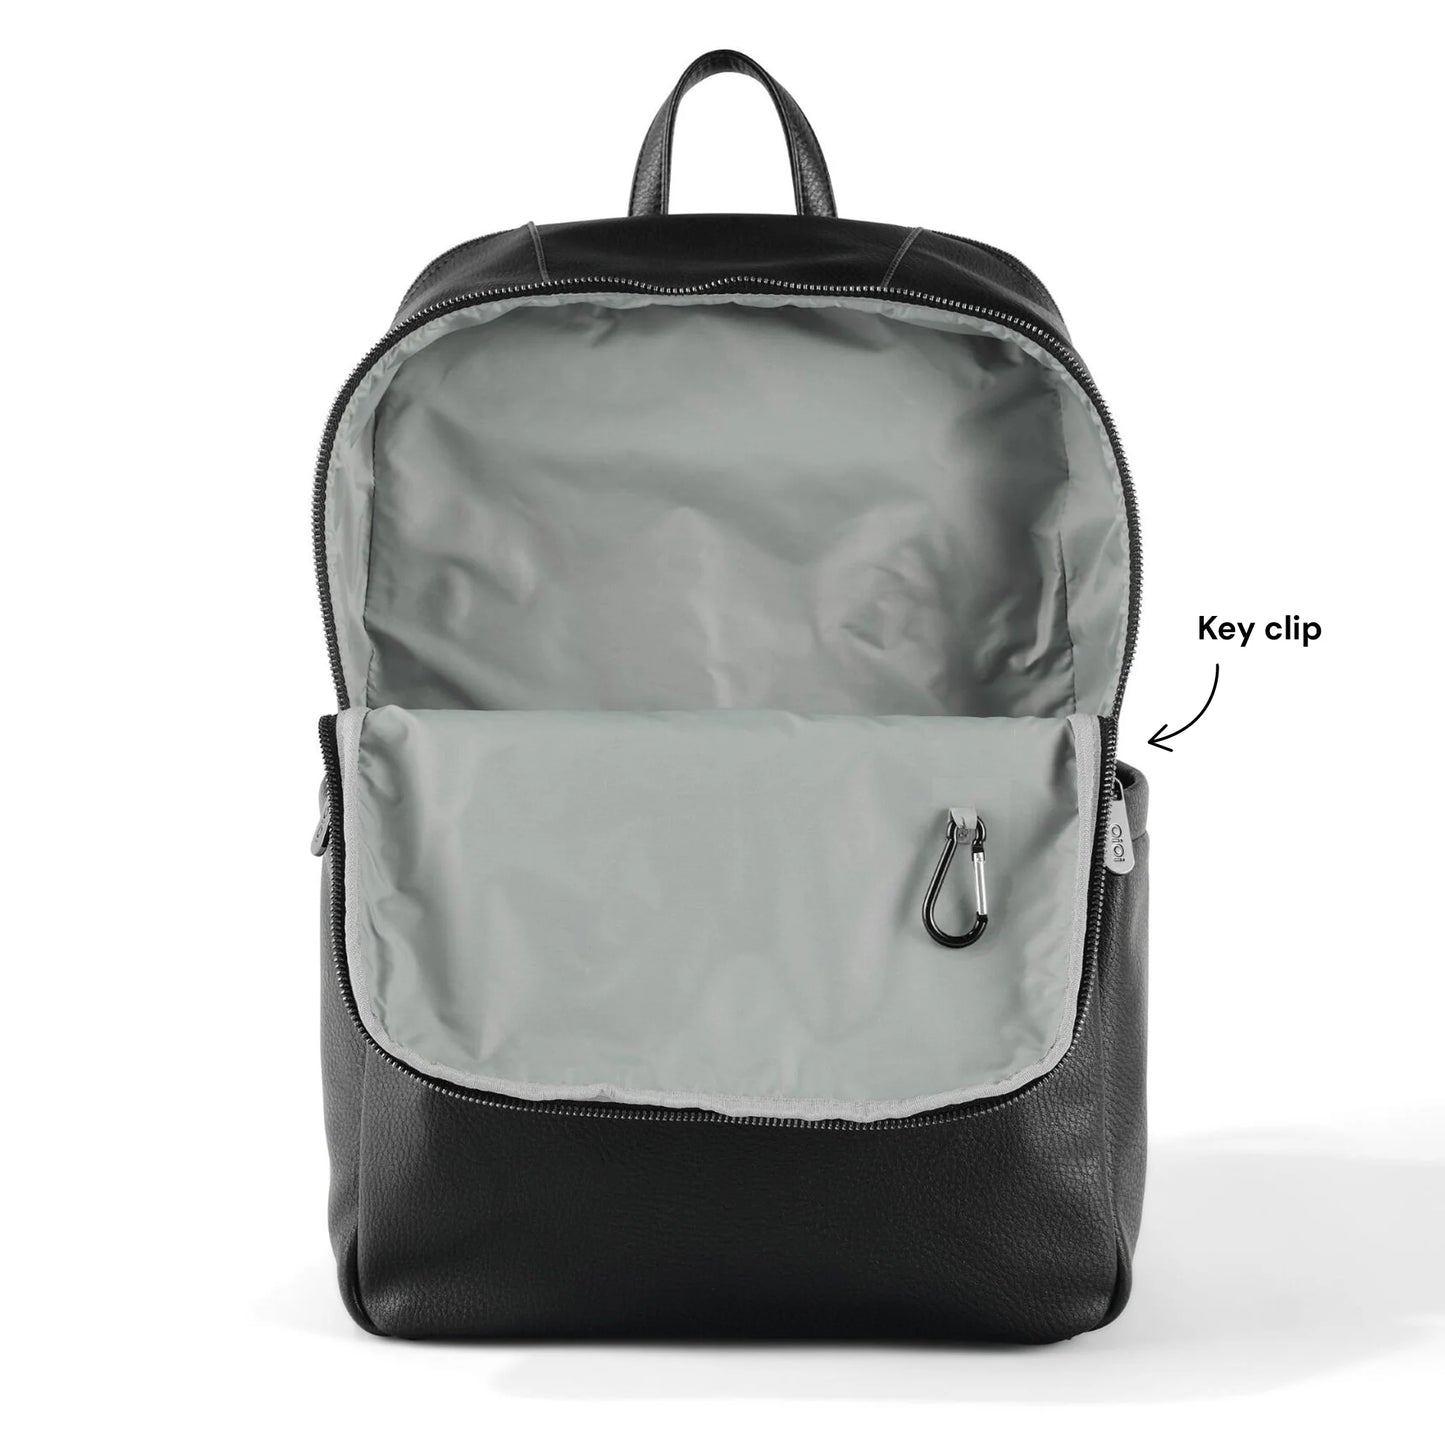 OiOi | Multitasker Nappy Backpack | Black Faux Leather